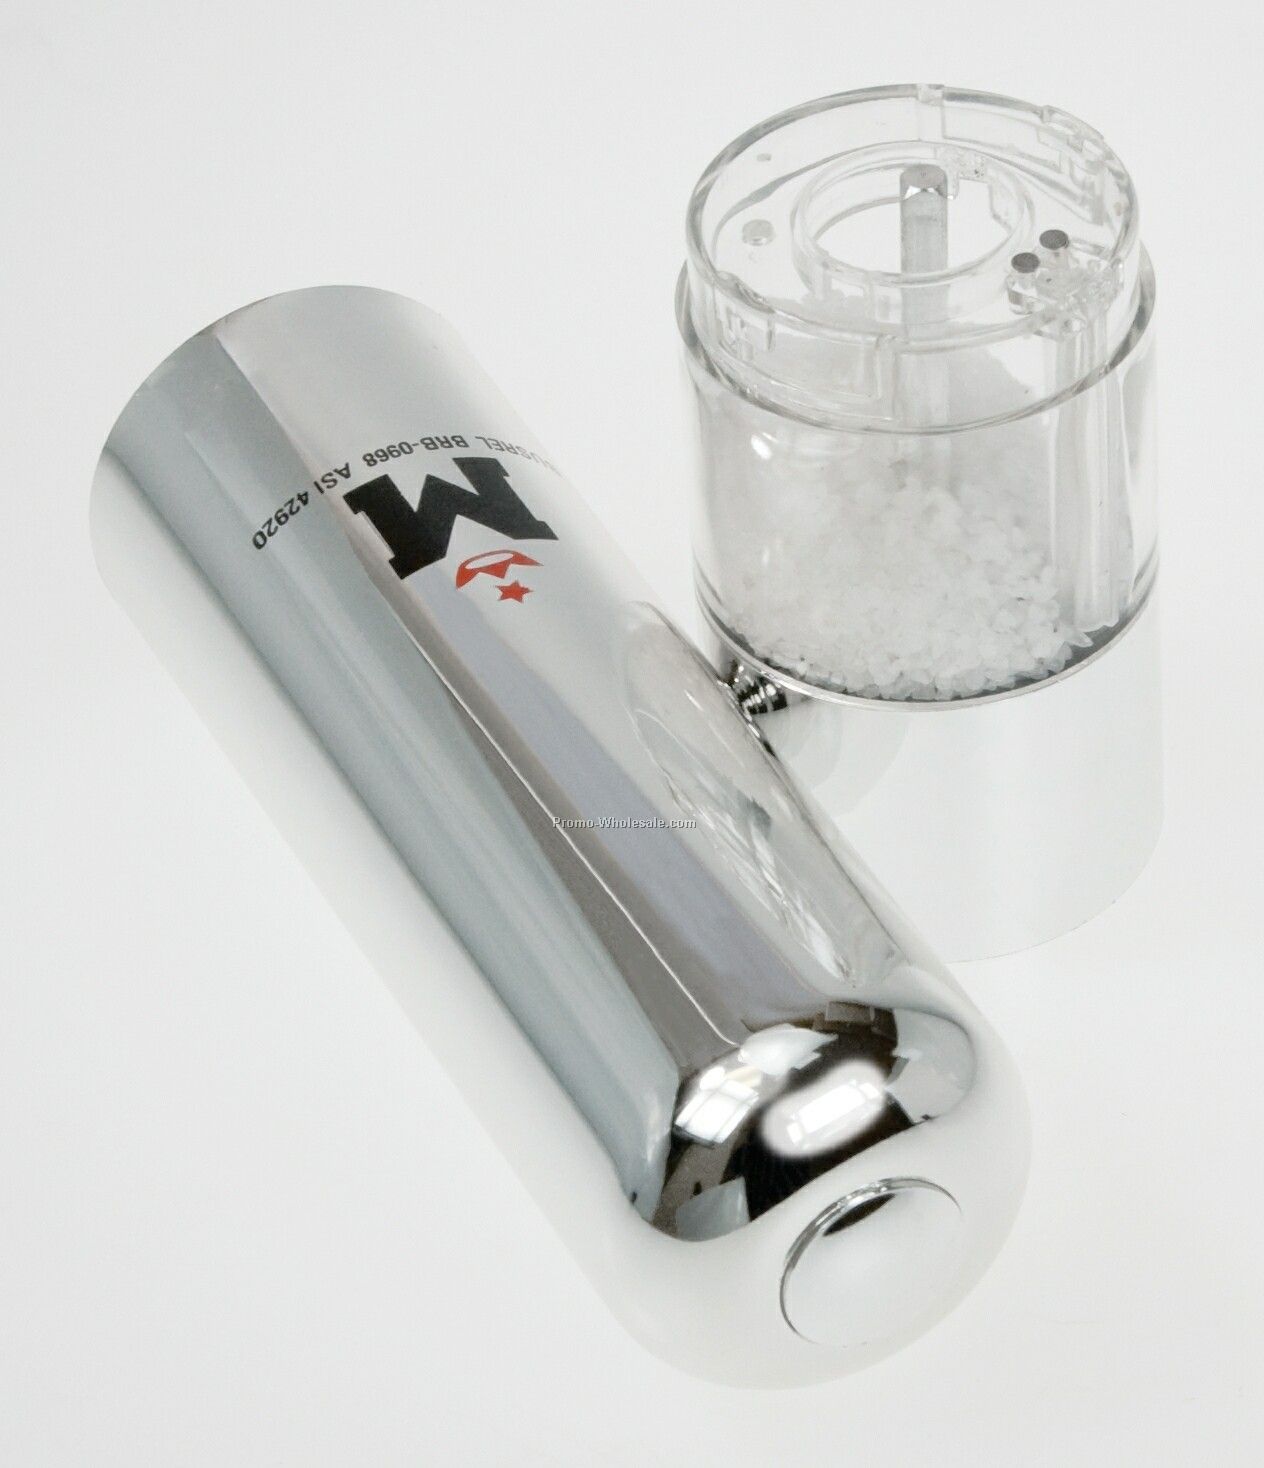 Automatic Salt And Pepper Grinder